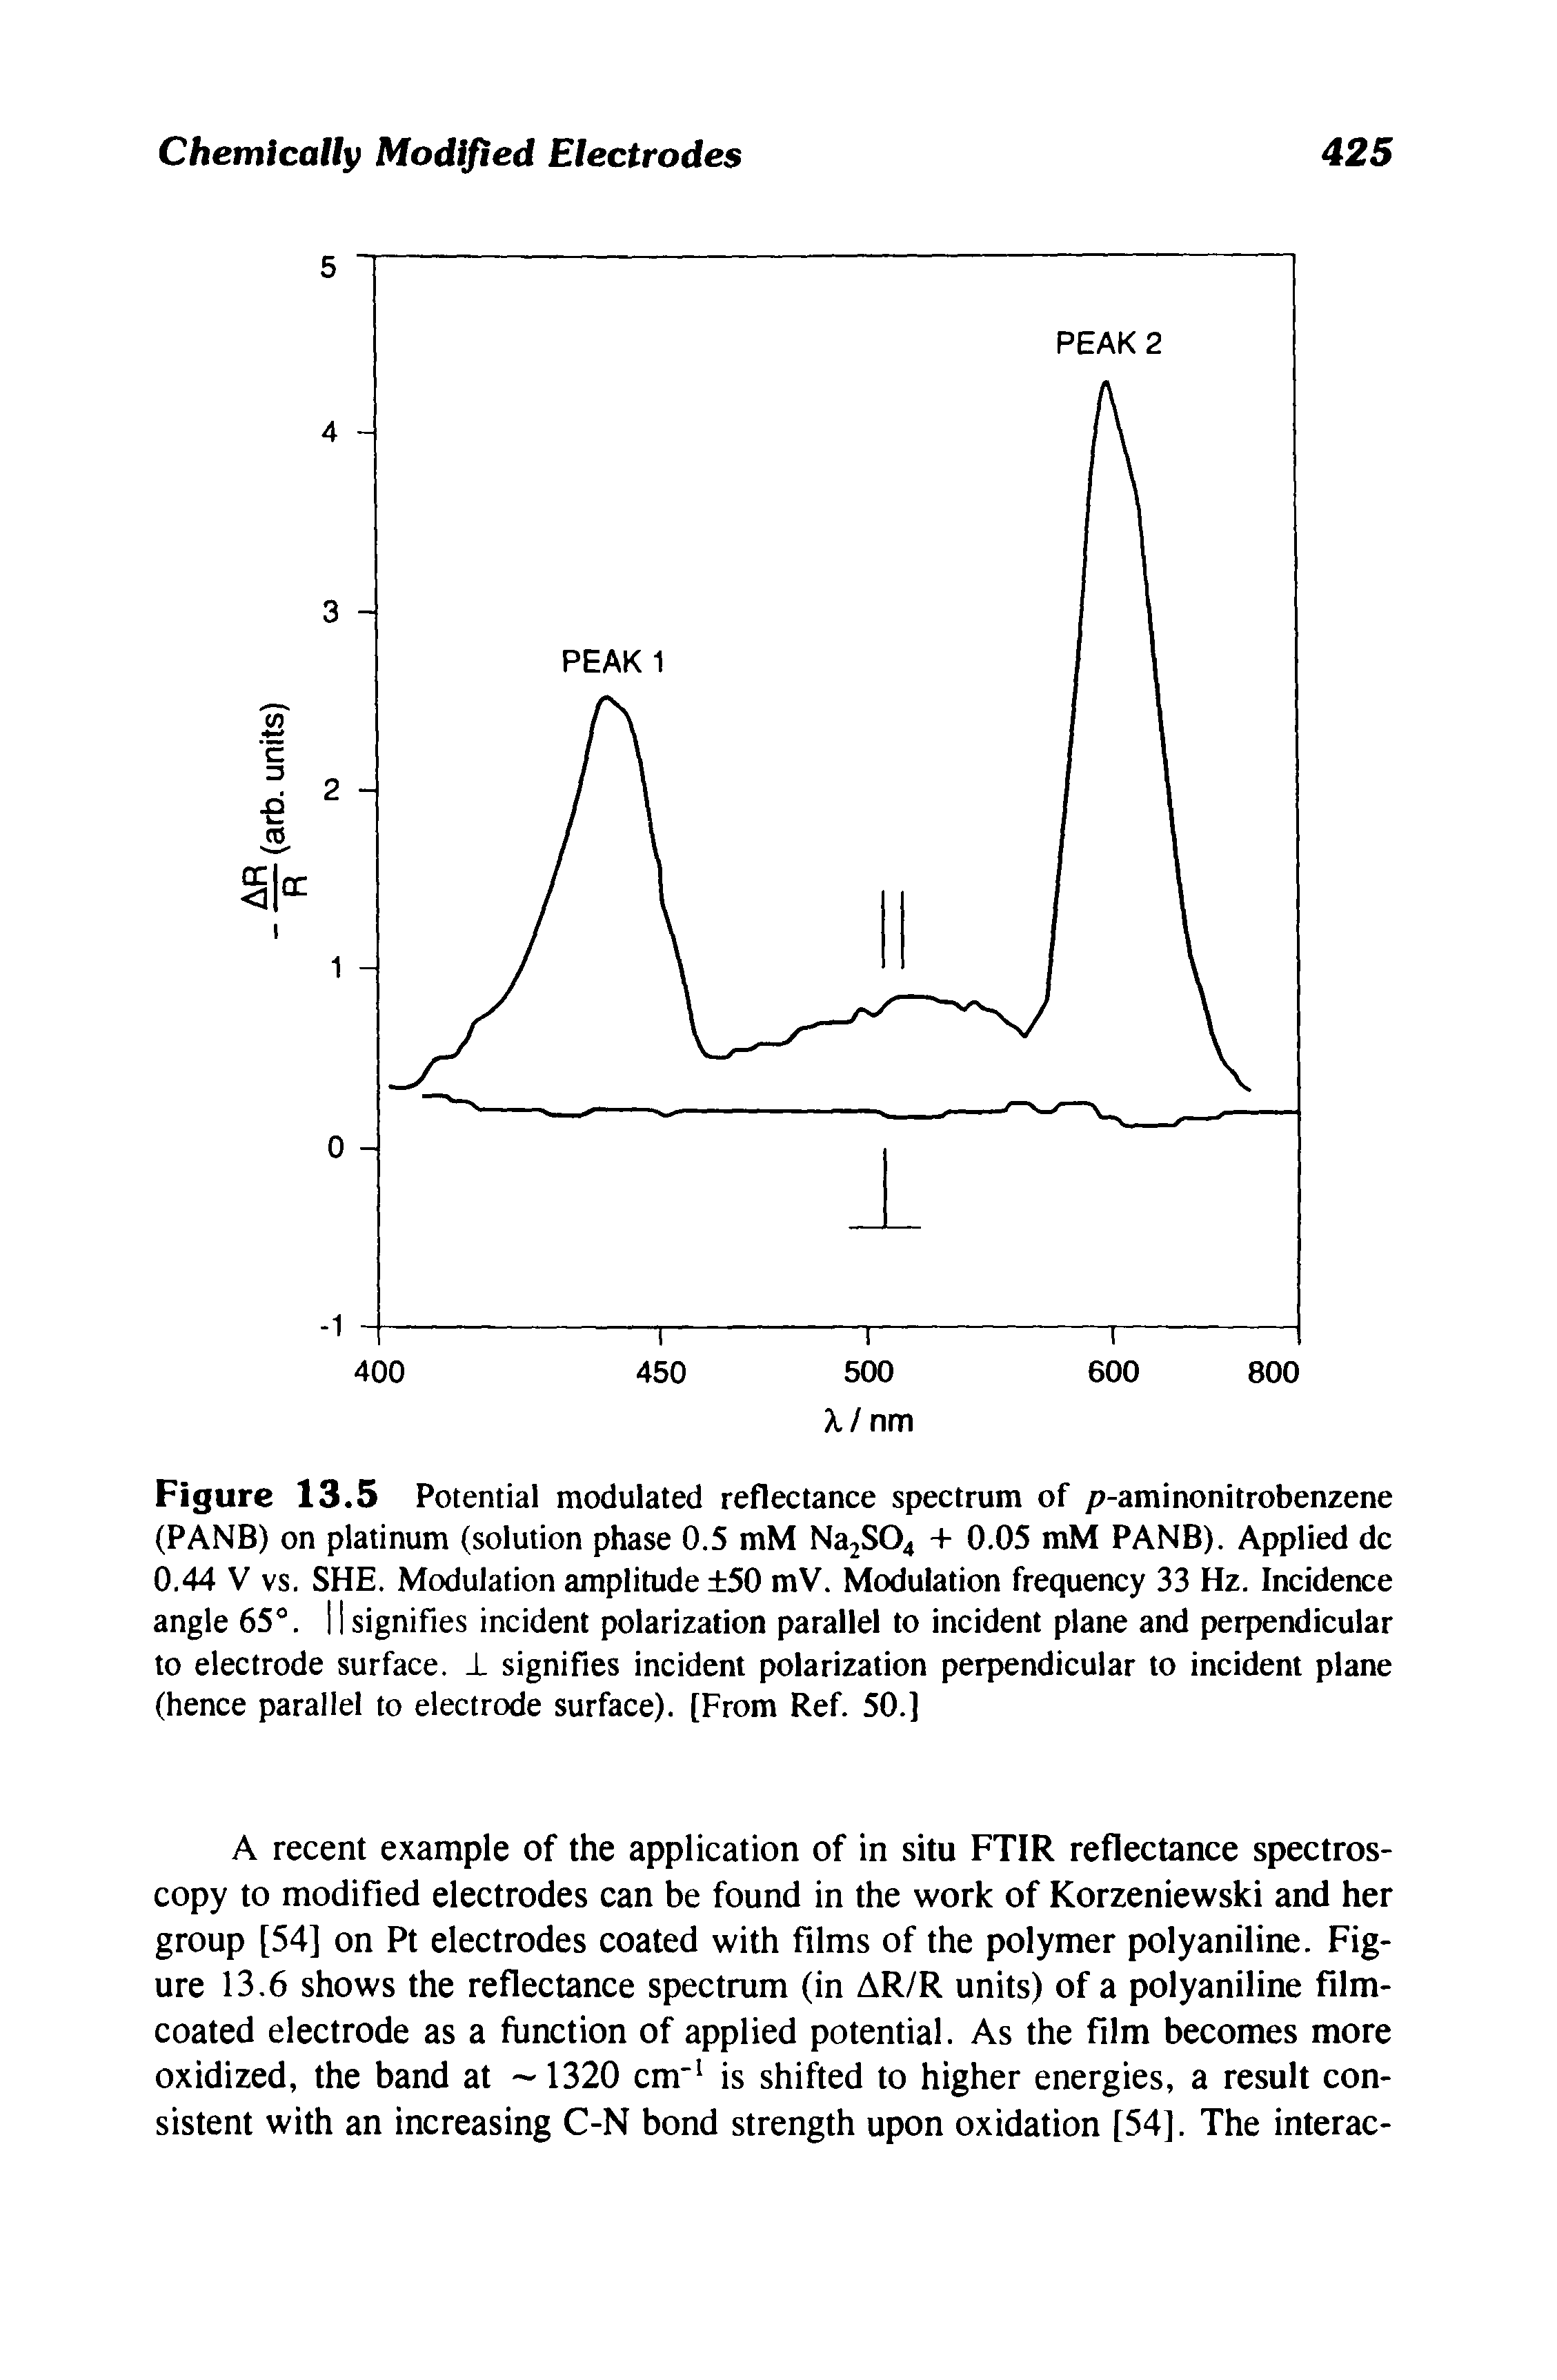 Figure 13.5 Potential modulated reflectance spectrum of p-aminonitrobenzene (PANB) on platinum (solution phase 0.5 mM Na2S04 + 0.05 mM PANB). Applied dc 0.44 V vs. SHE. Modulation amplitude 50 mV. Modulation frequency 33 Hz. Incidence angle 65°. 11 signifies incident polarization parallel to incident plane and perpendicular to electrode surface. J signifies incident polarization perpendicular to incident plane (hence parallel to electrode surface). [From Ref. 50.]...